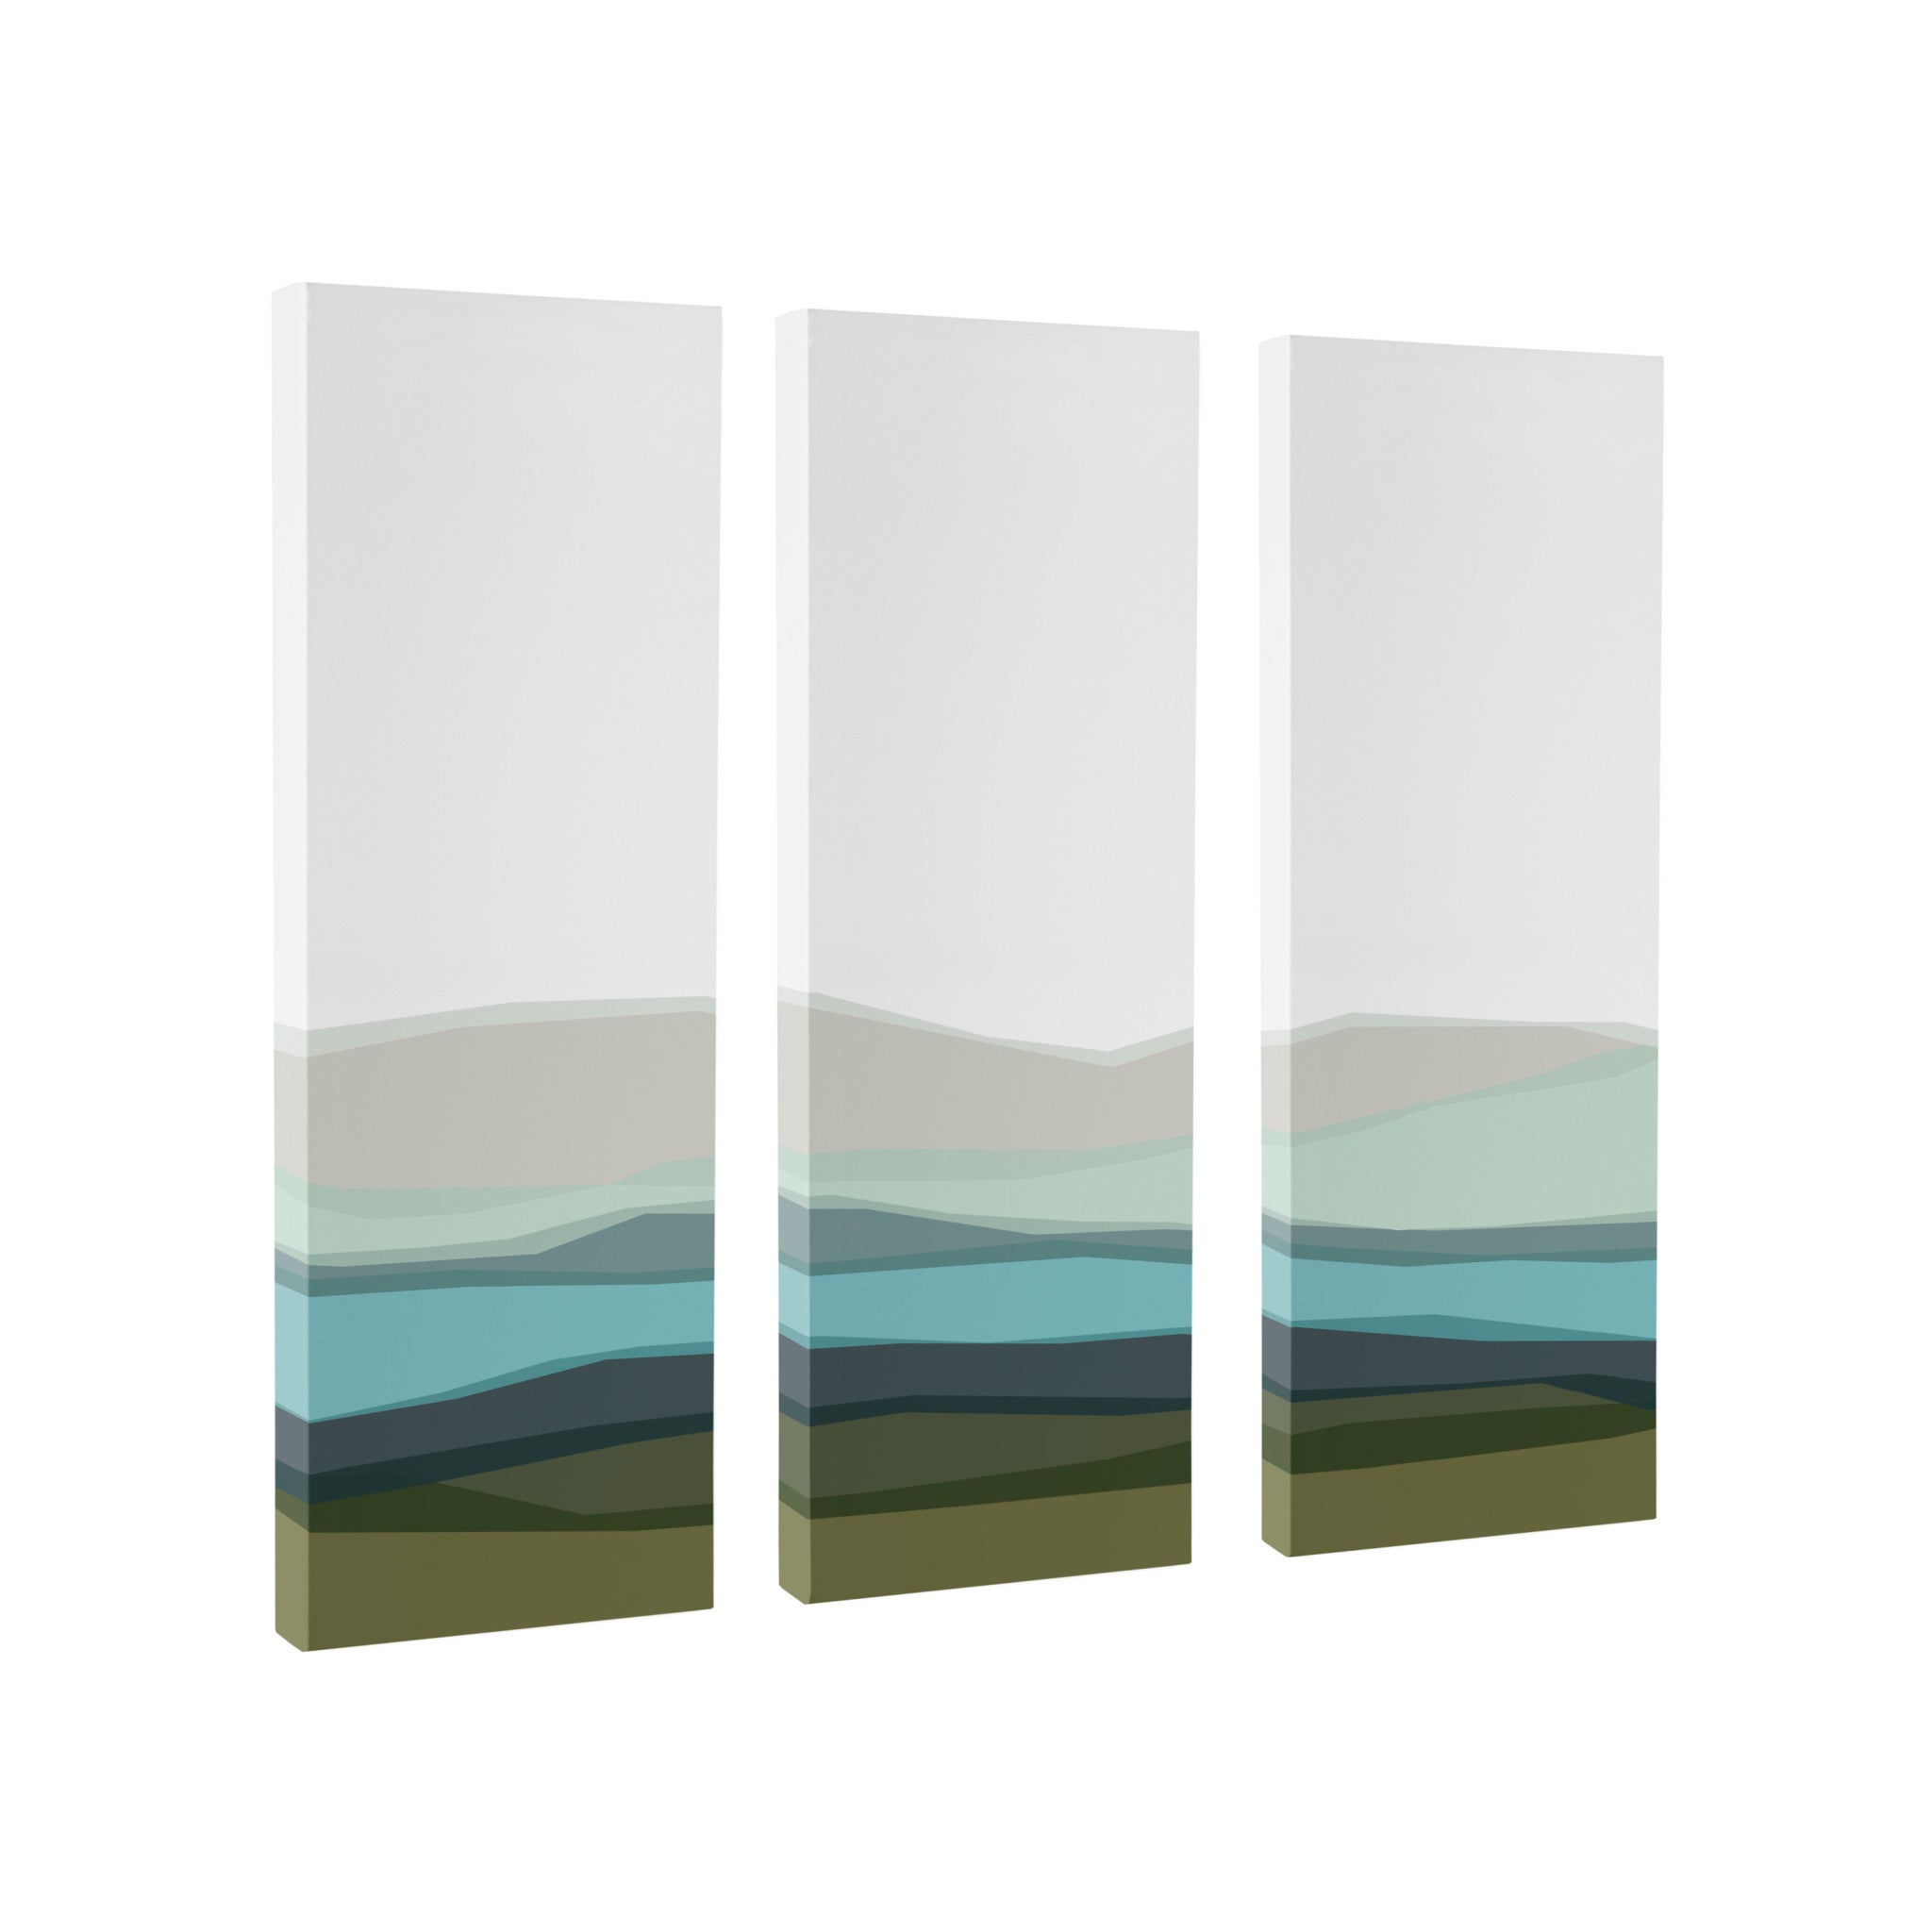 Abstract Blue Lake and Mountains Canvas Art Set by The Creative Bunch Studio